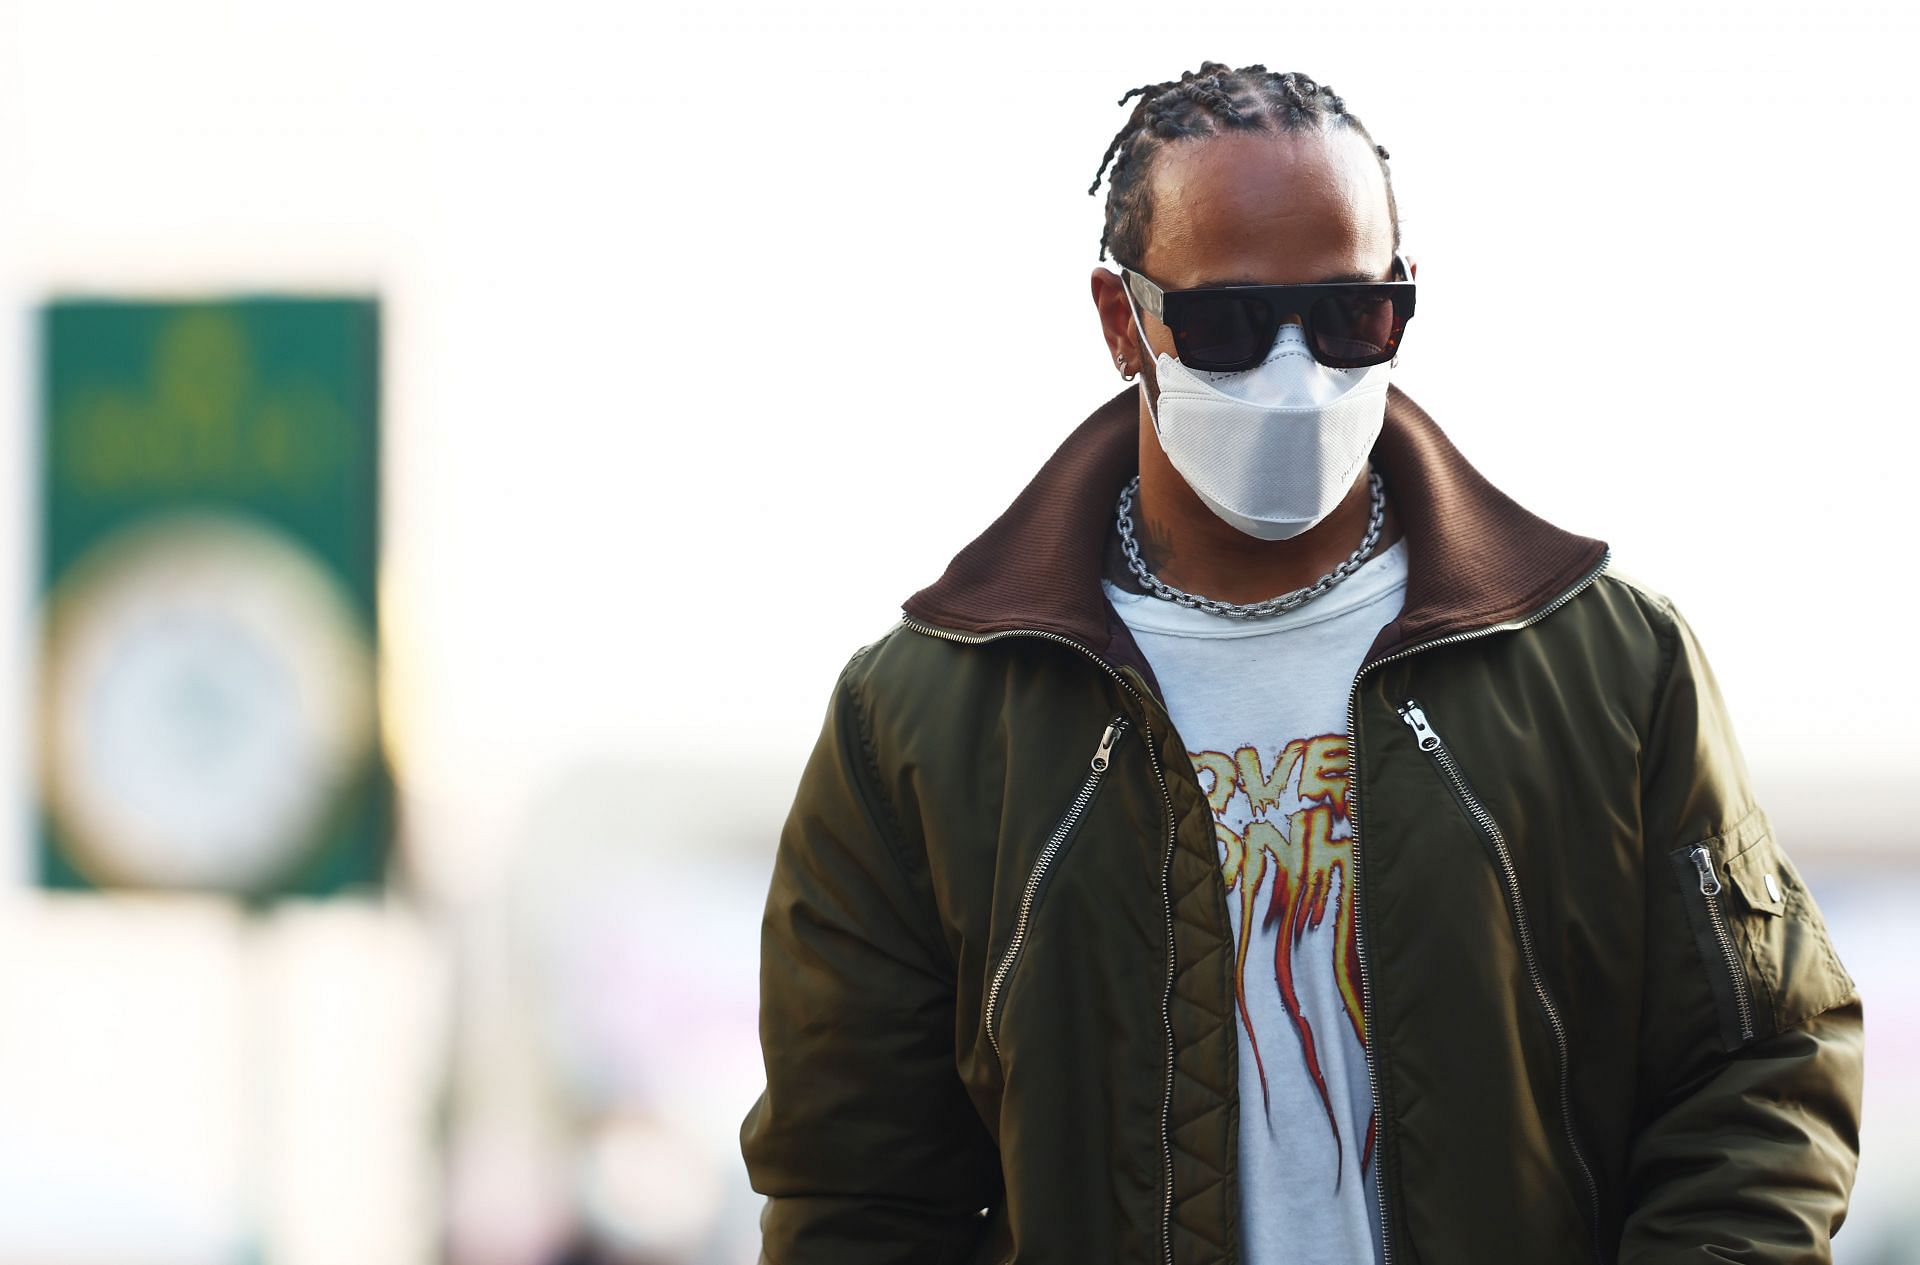 Lewis Hamilton walks in the Paddock ahead of the Saudi Arabian Grand Prix in Jeddah. (Photo by Mark Thompson/Getty Images)